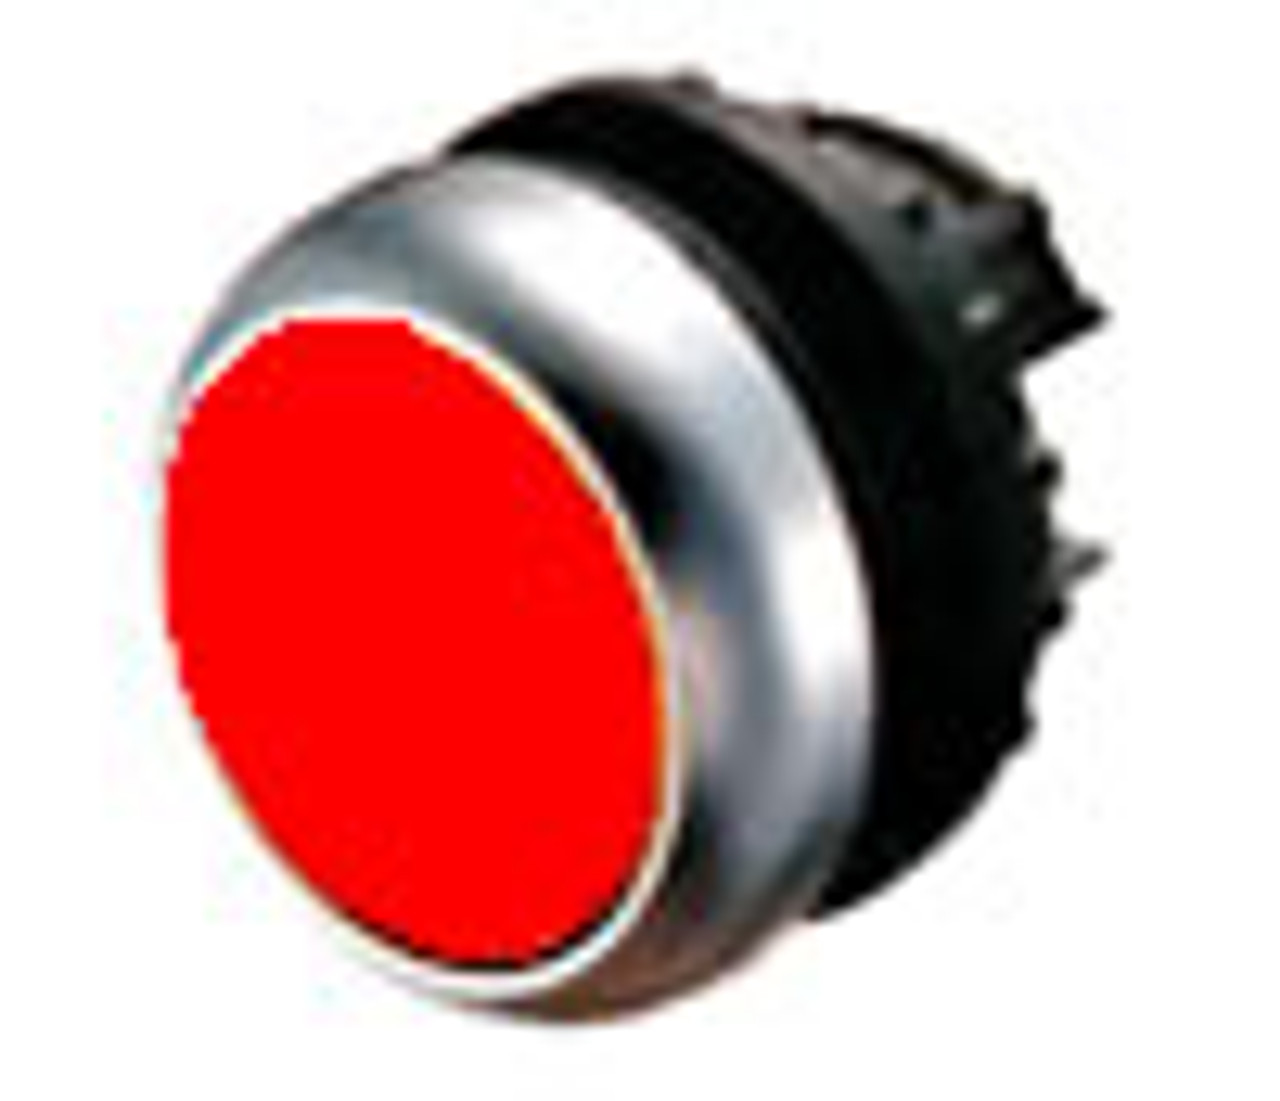 Moeller M22-DL-R red illuminated pushbutton